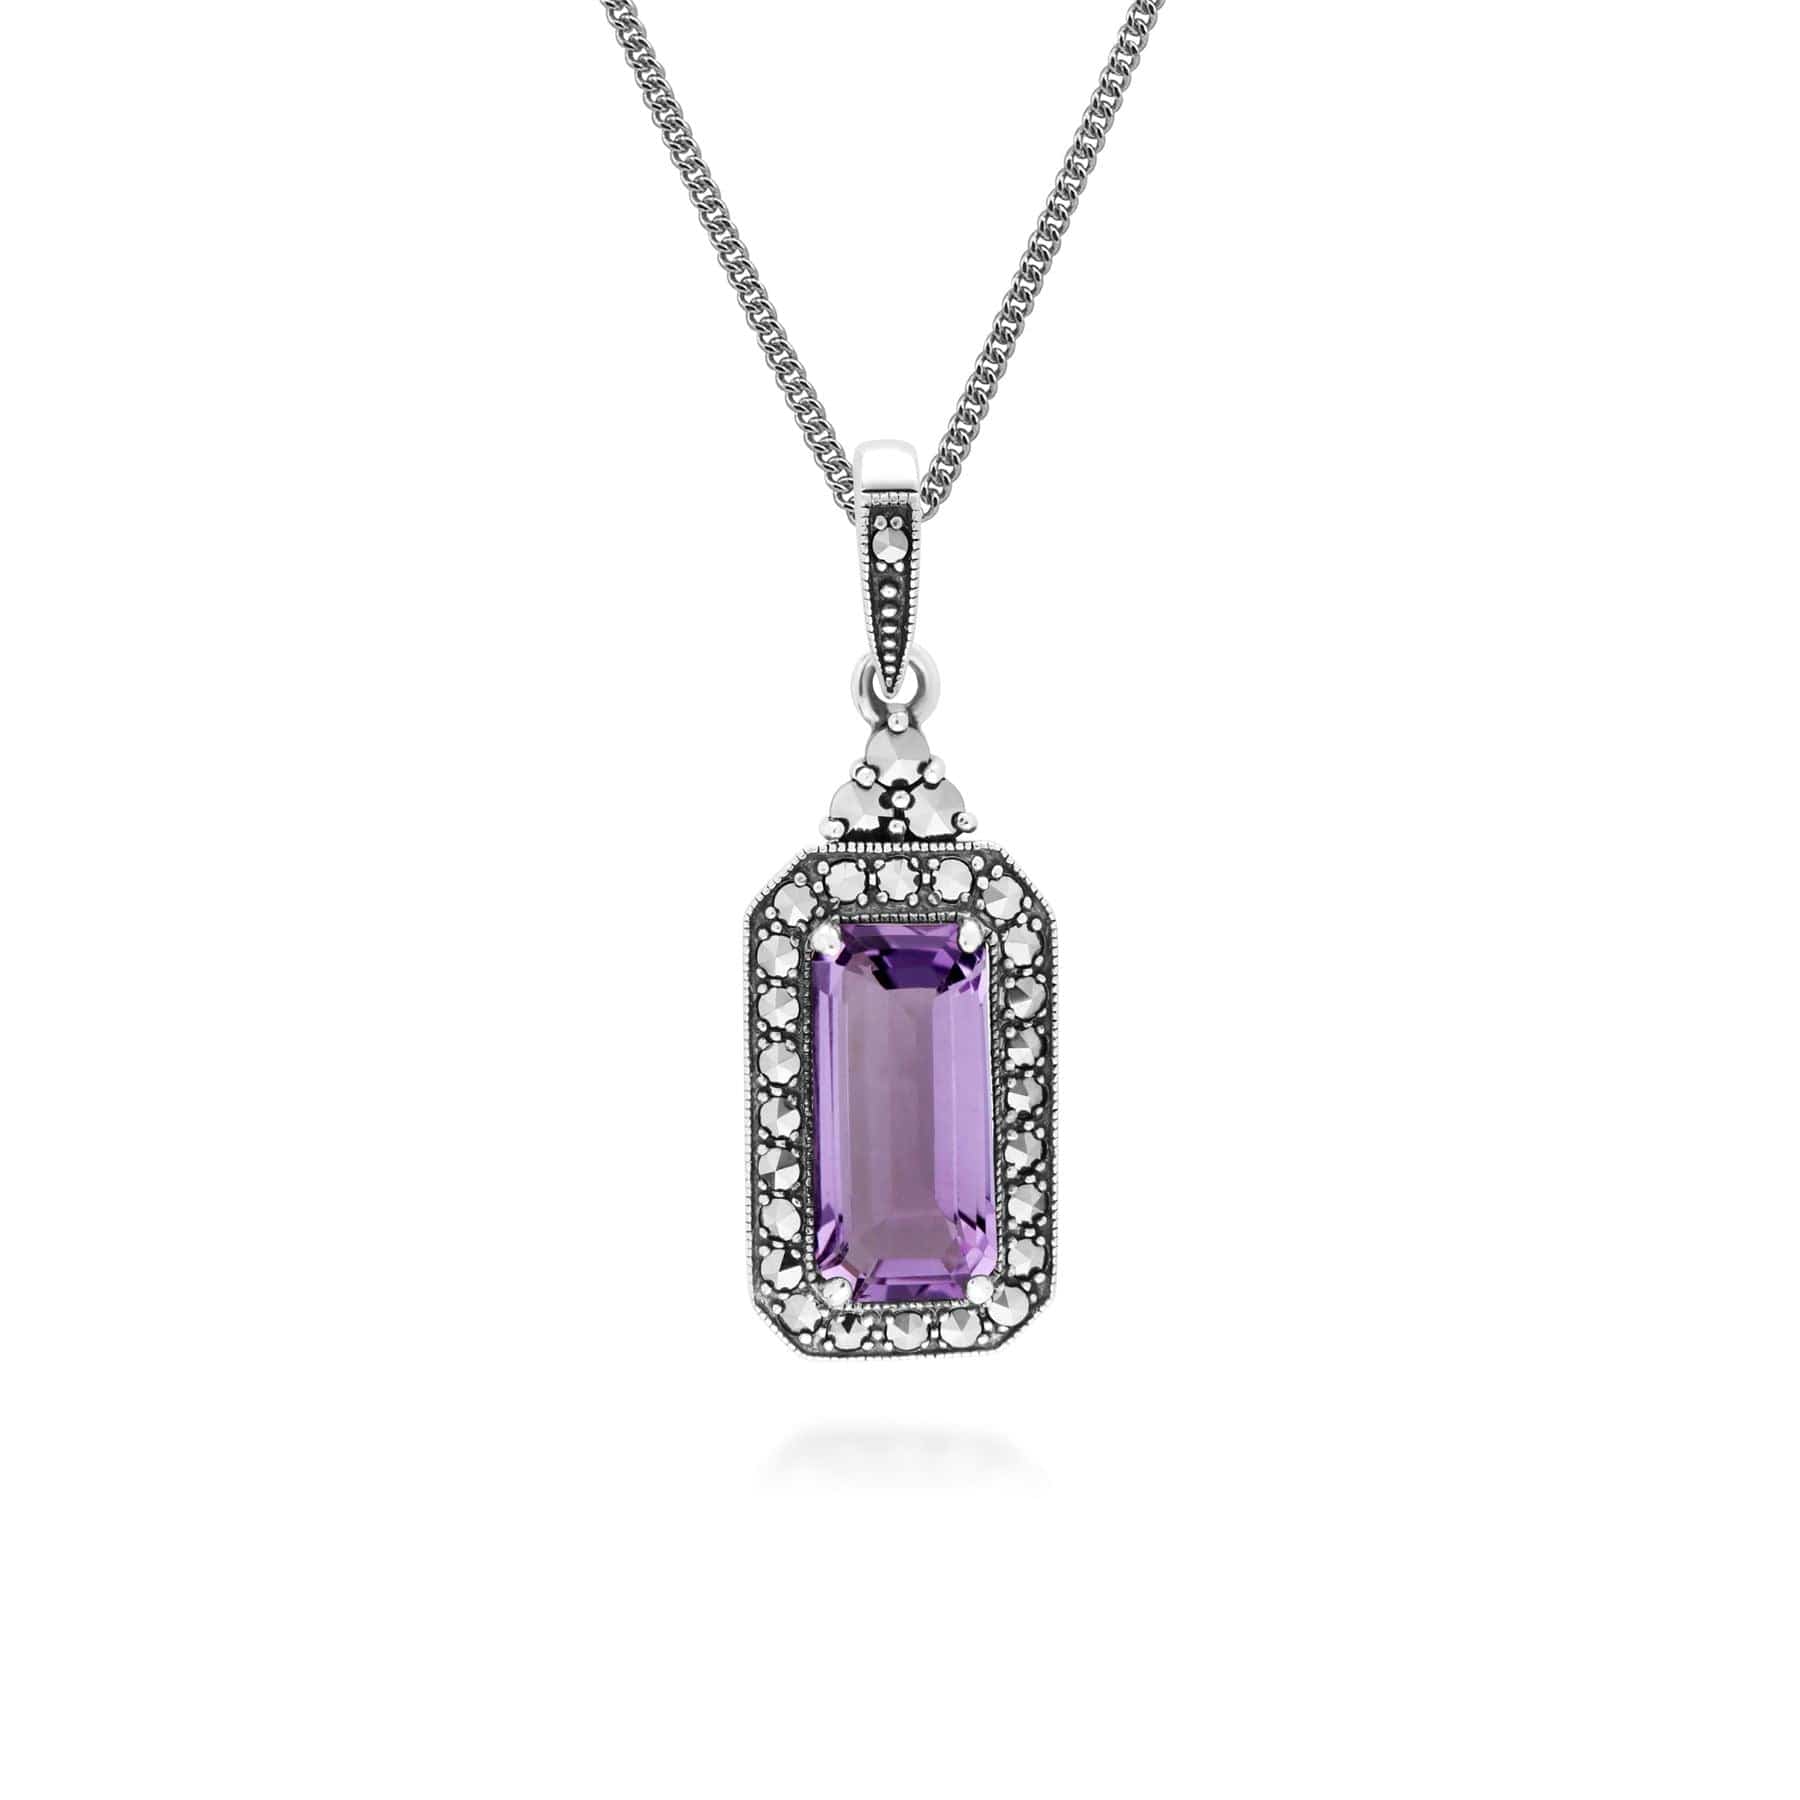 214P311403925 Art Deco Inspired Octagon Cut Amethyst & Marcasite Pendant Necklace in Sterling Silver 1